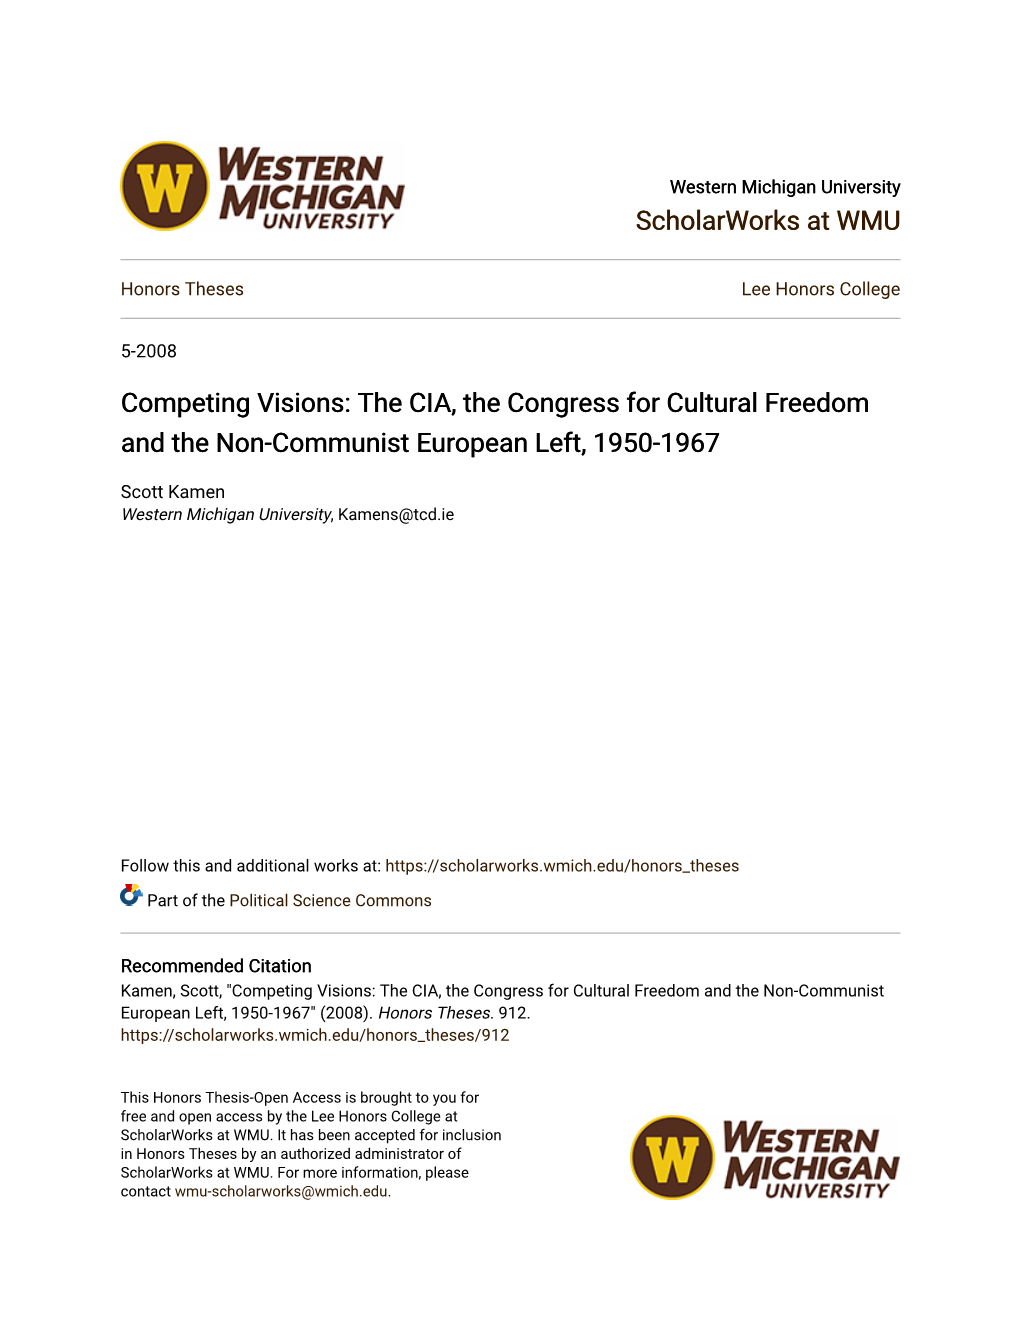 The Congress for Cultural Freedom and the Non-Communist European Left, 1950-1967